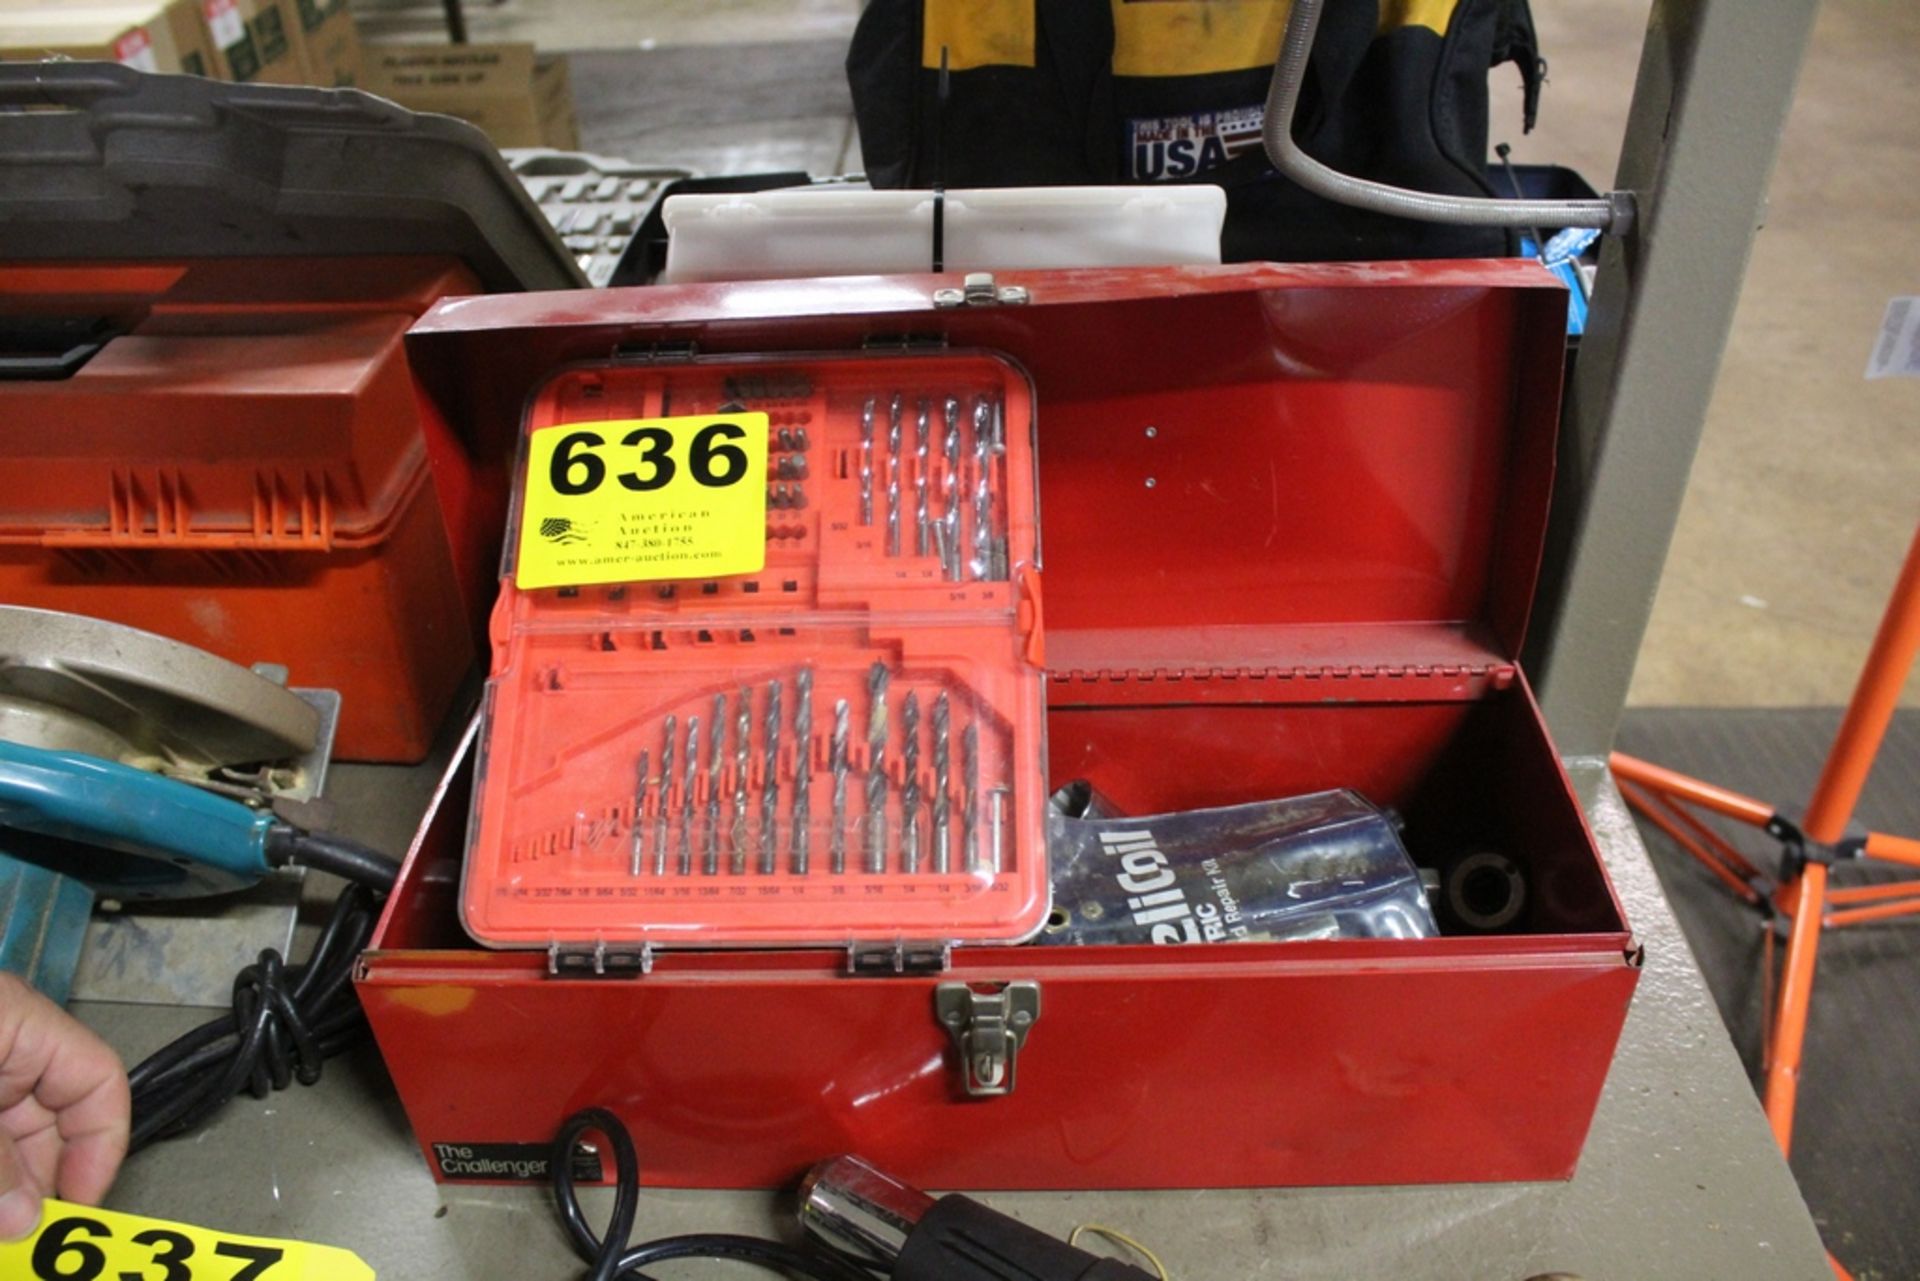 ASSORTED SOCKETS AND DRILL BIT KIT IN TOOLBOX